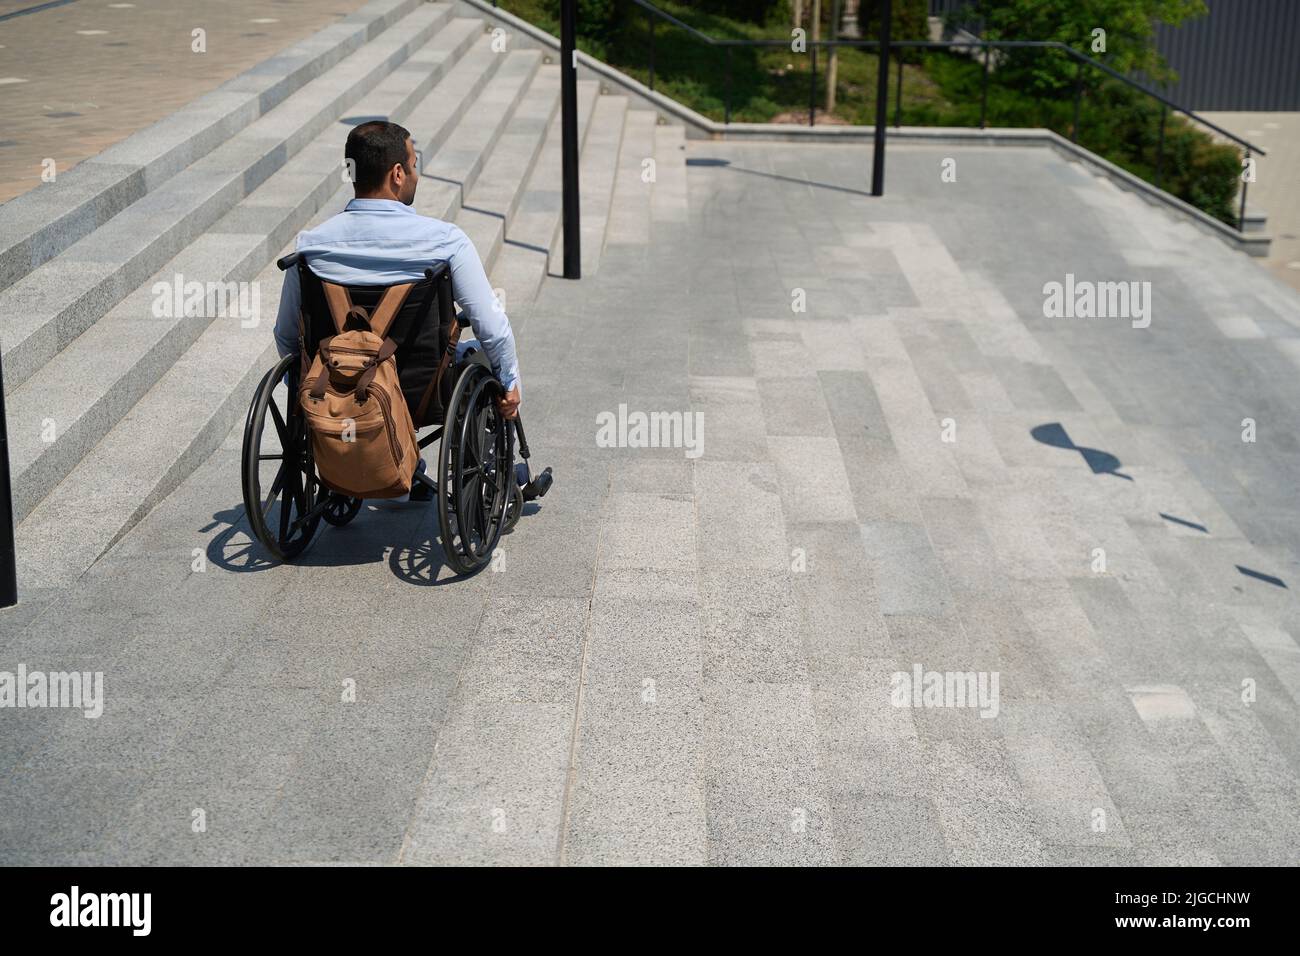 Man with disability descending concrete staircase outdoors Stock Photo